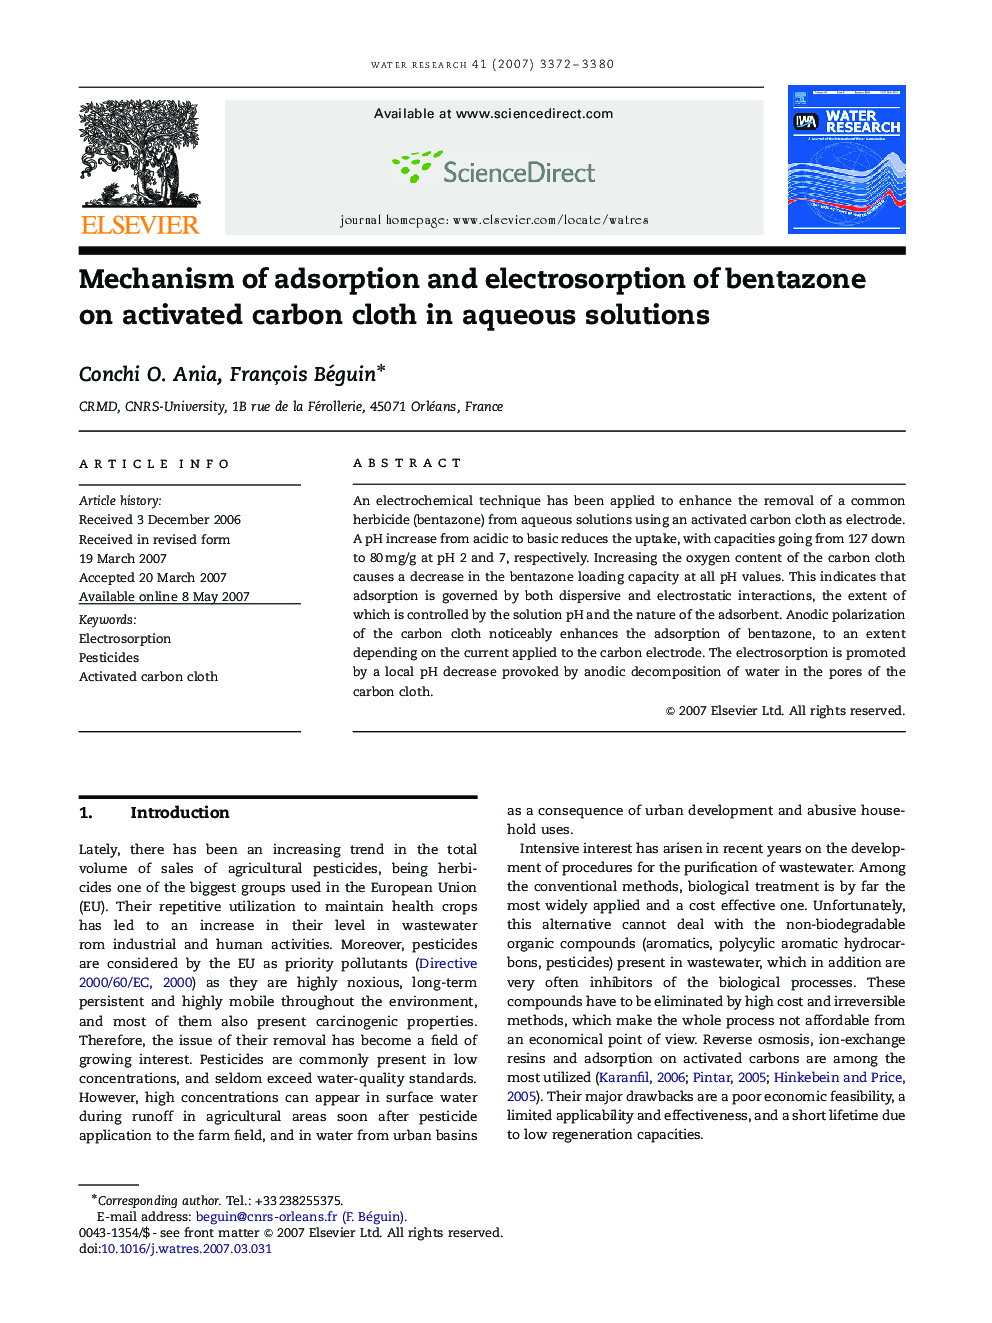 Mechanism of adsorption and electrosorption of bentazone on activated carbon cloth in aqueous solutions